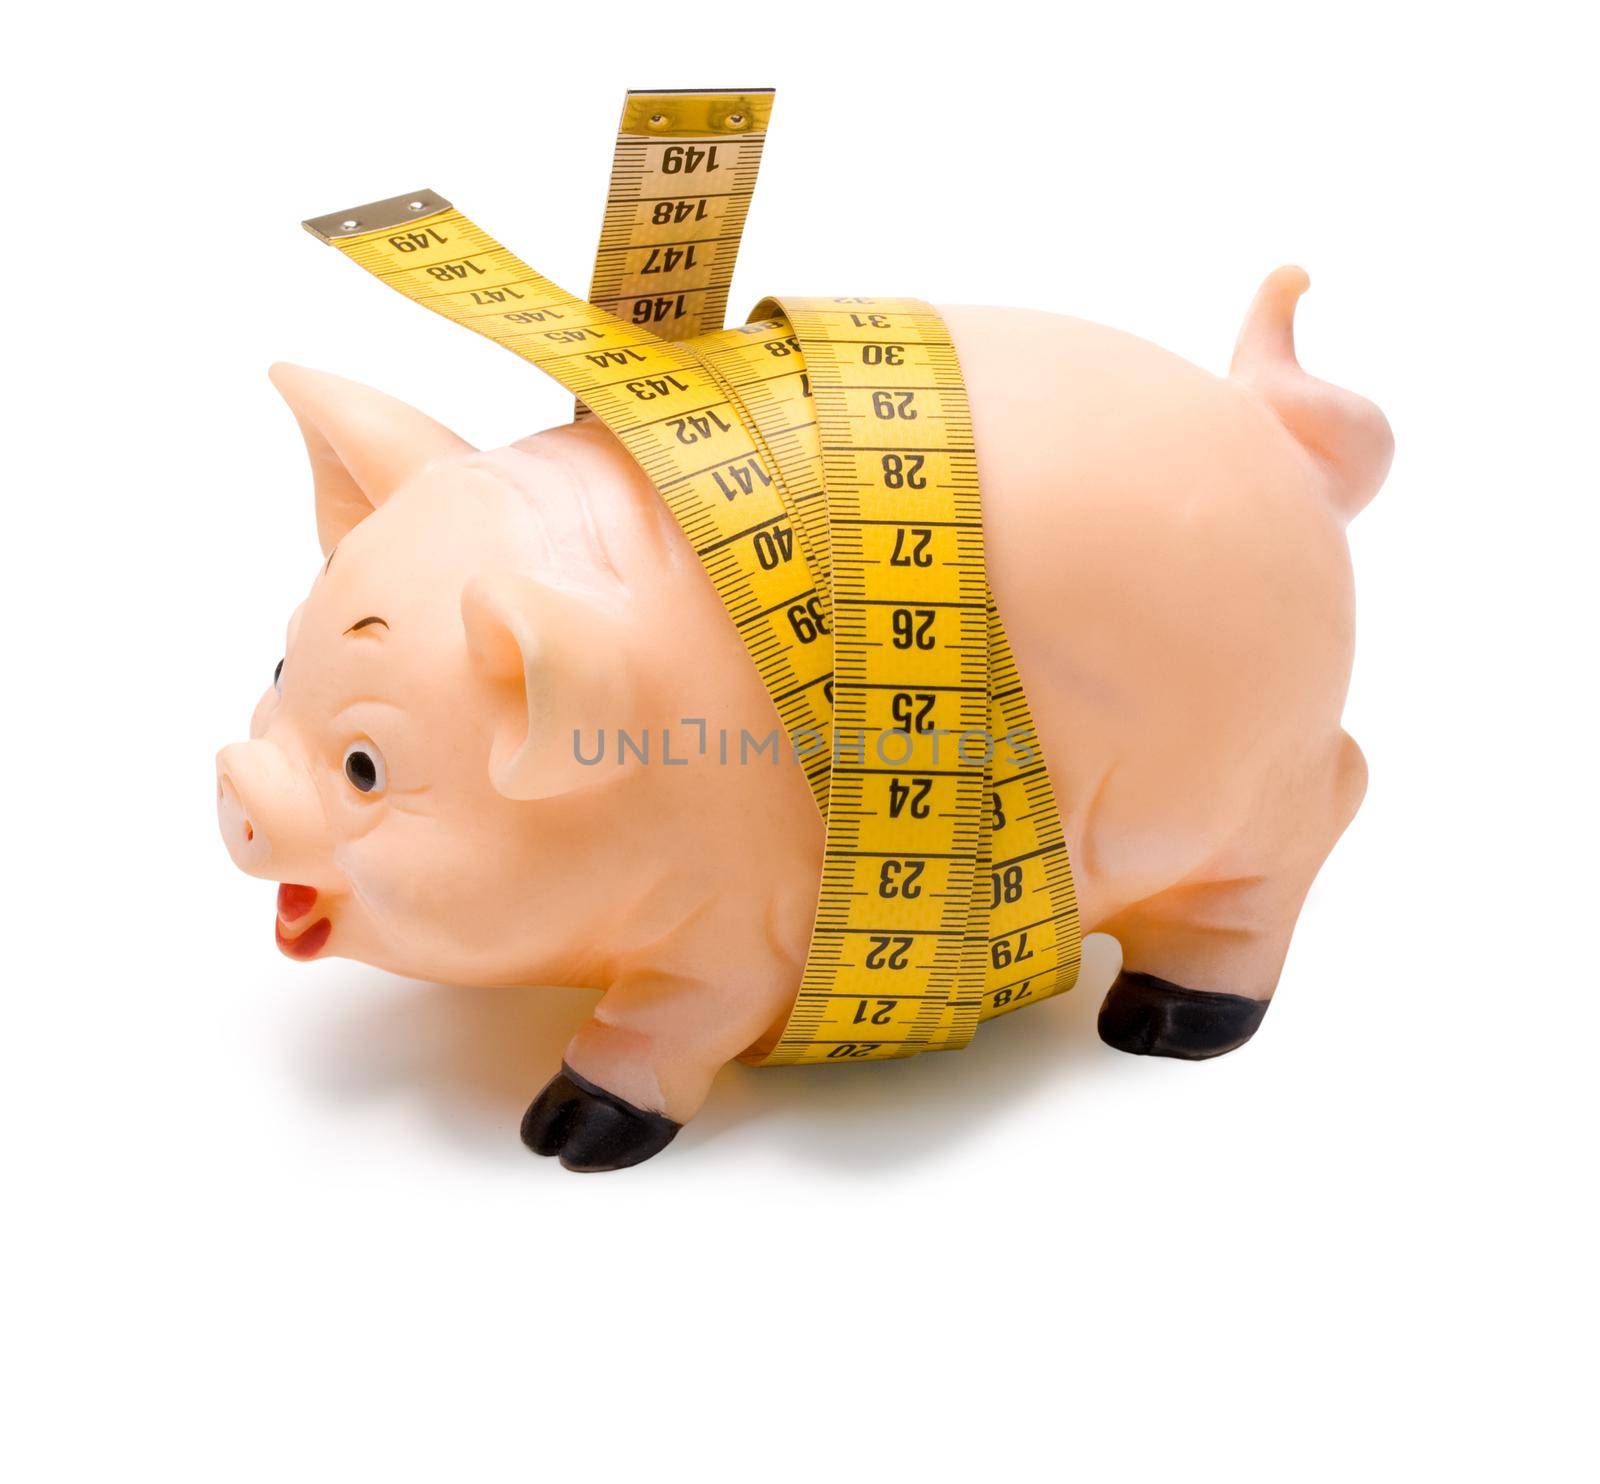 fat pig measures the waist measuring tape on a light background